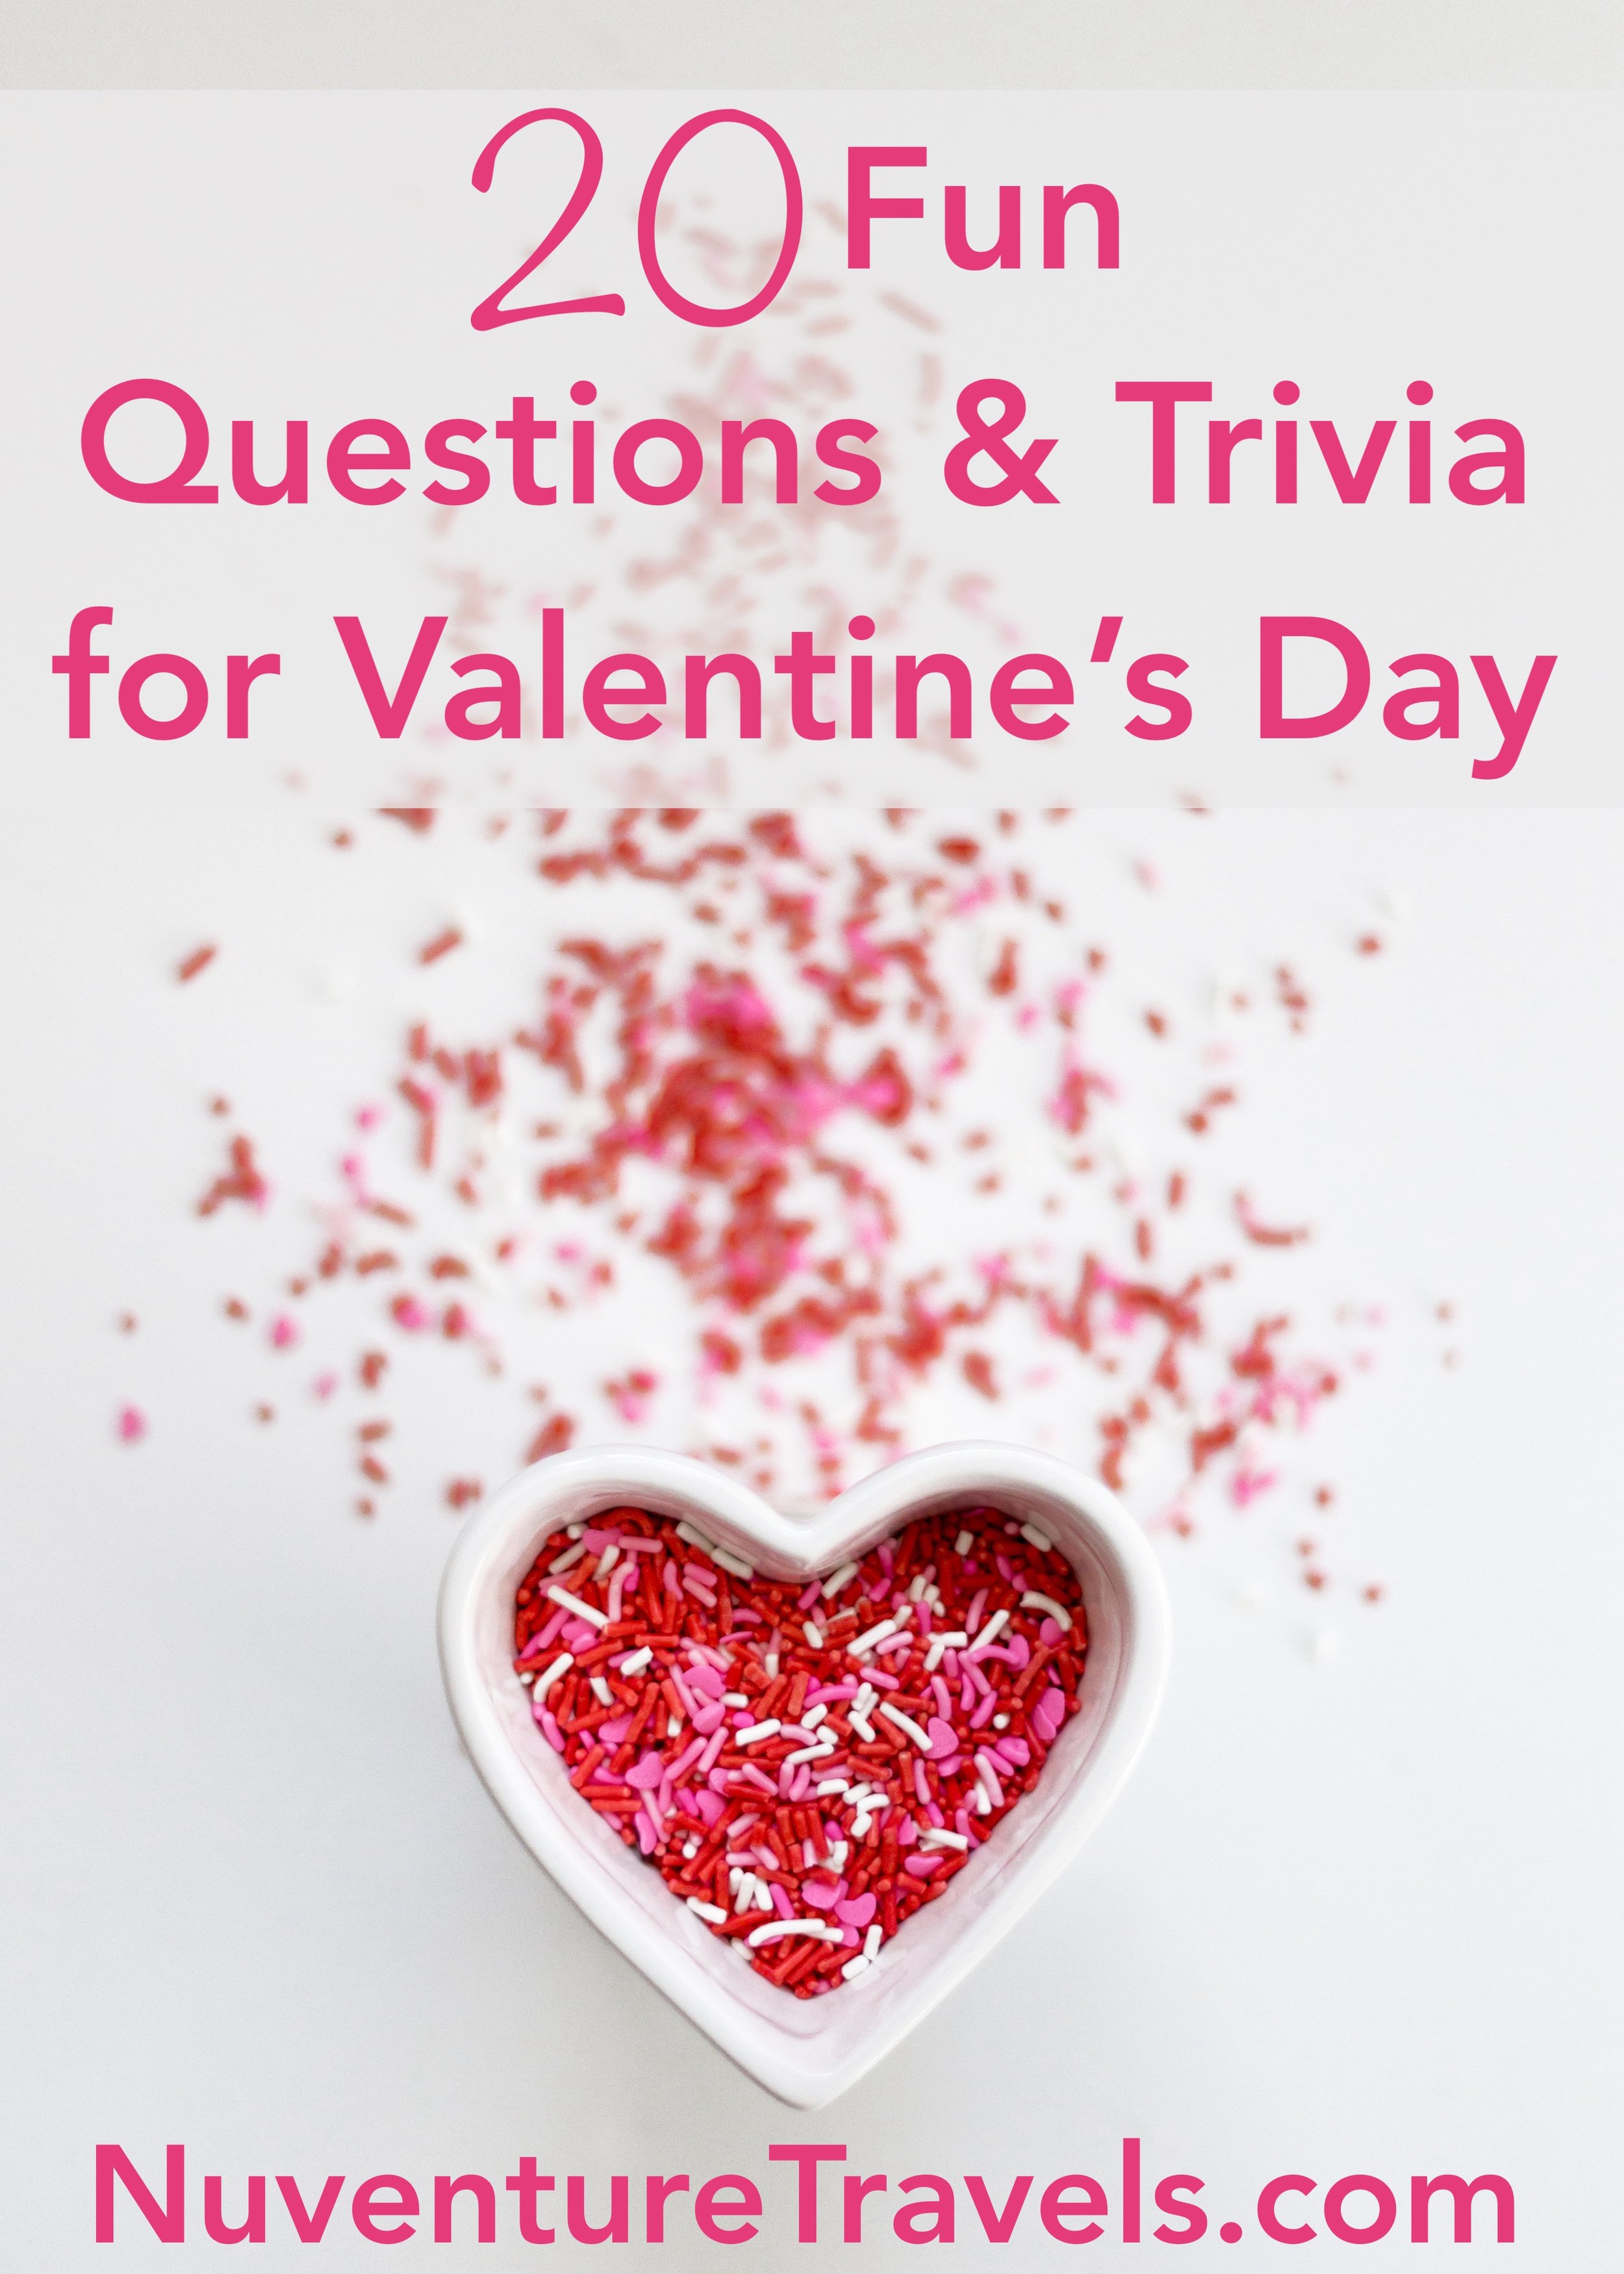 20 Fun Valentine's Day Questions & Trivia — Nuventure Travels